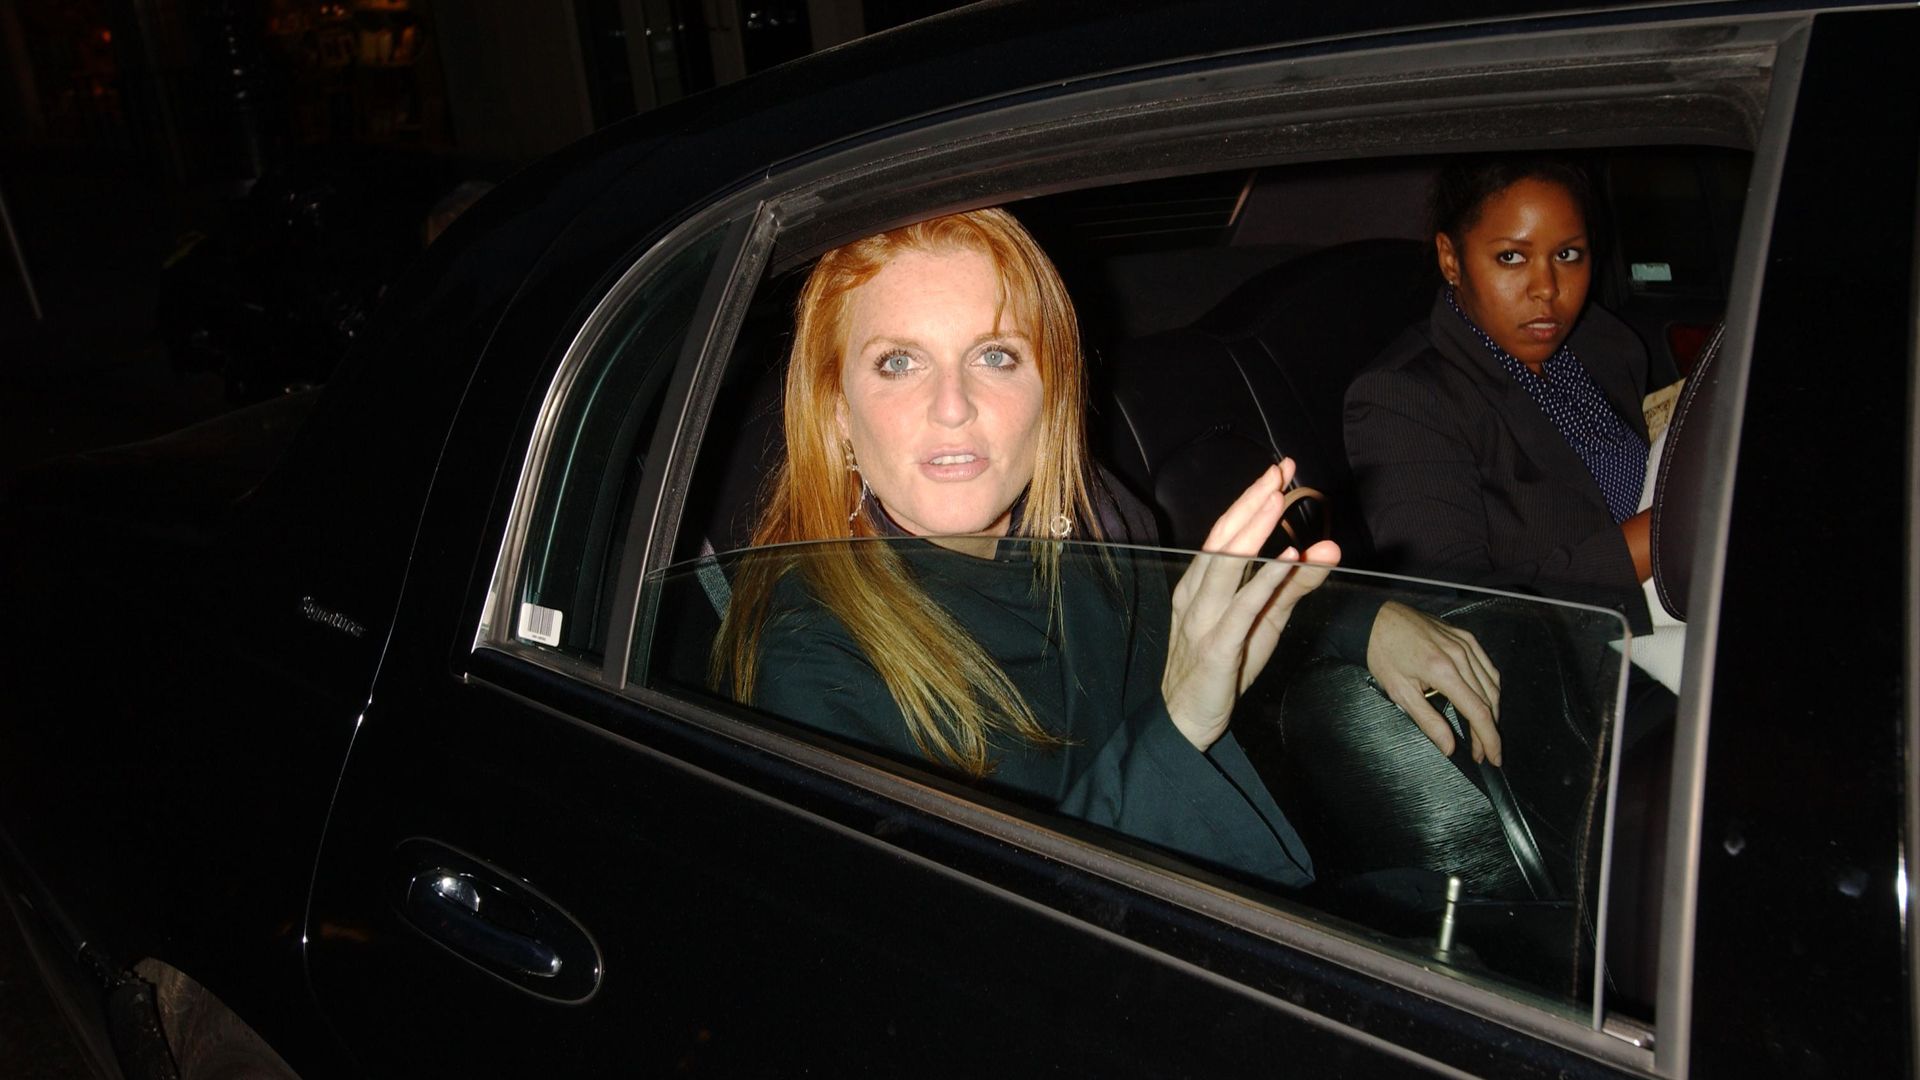 Duchess of York in a black car with her assistant in the background